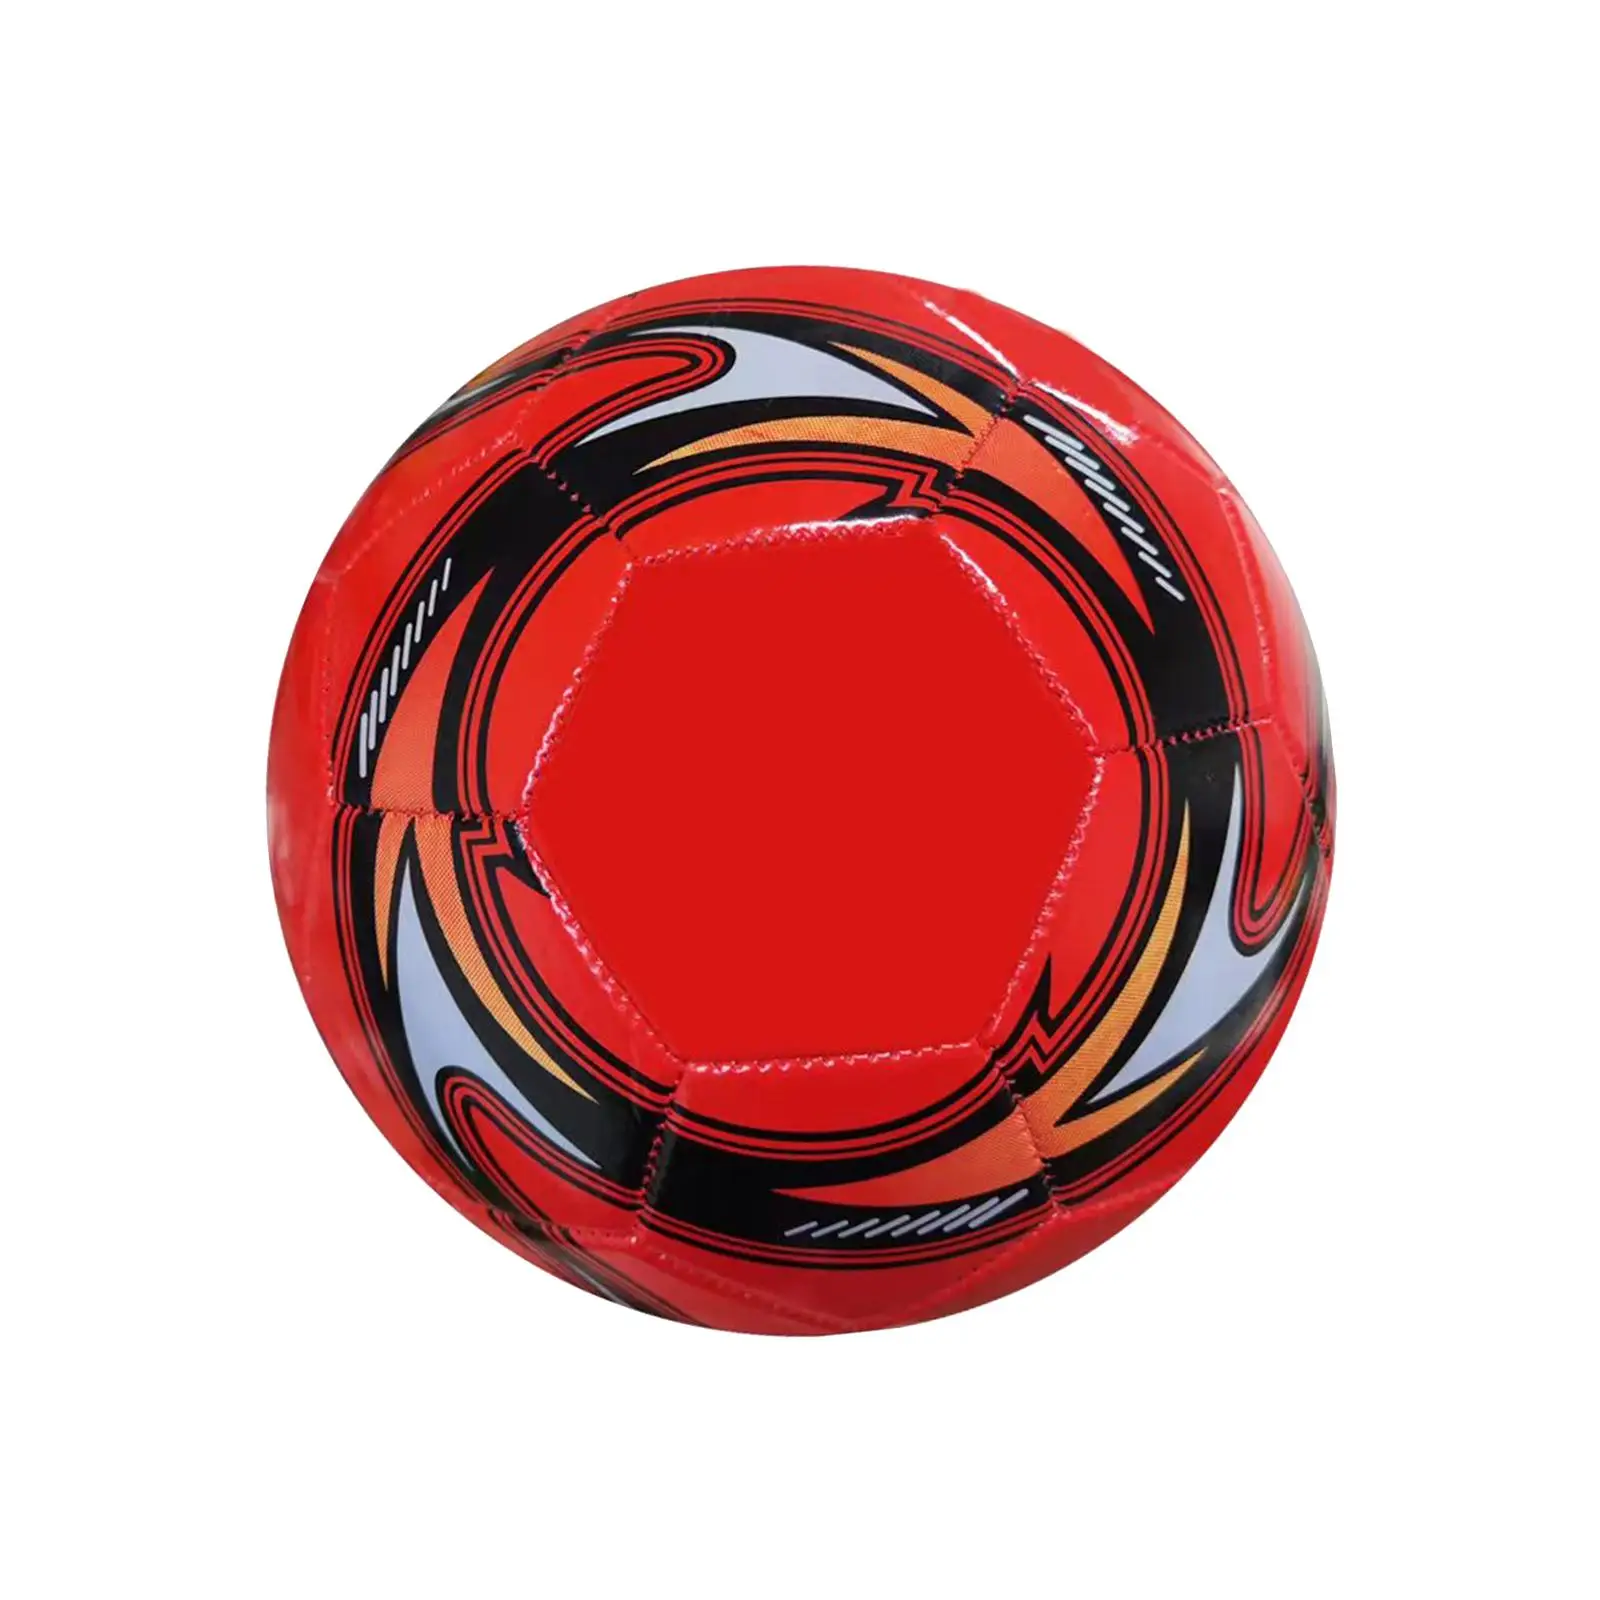 Soccer Ball Size 5 Machine Stitched Match Ball for Club Beginners